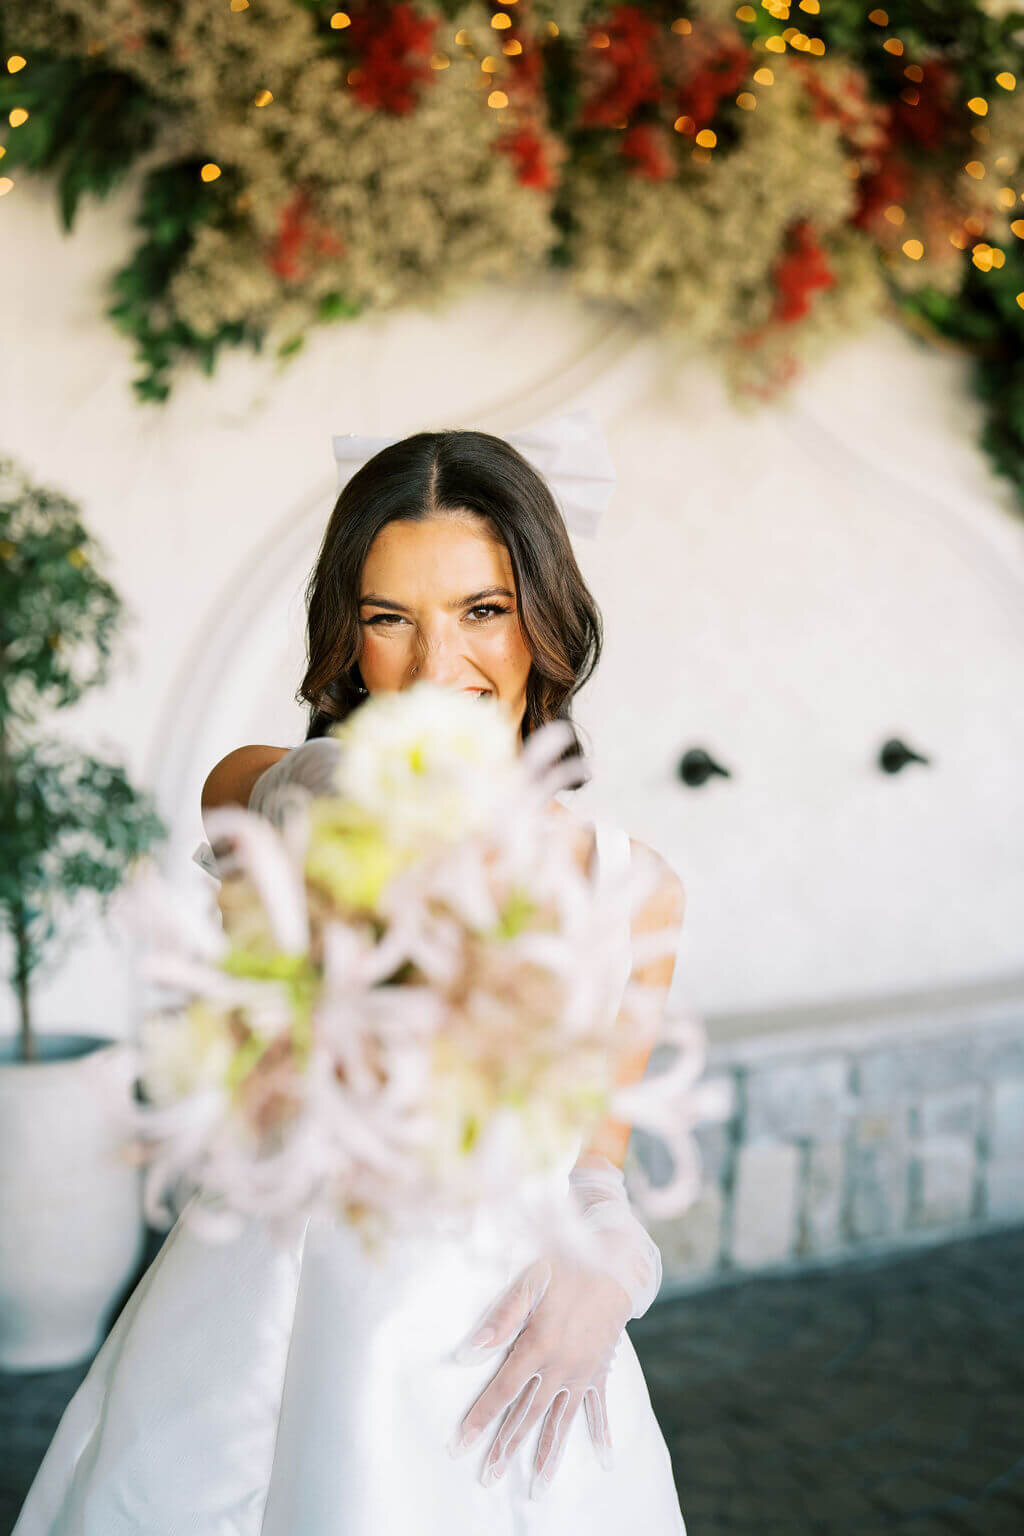 Bride wearing a white dress and gloves holding her bridal bouquet